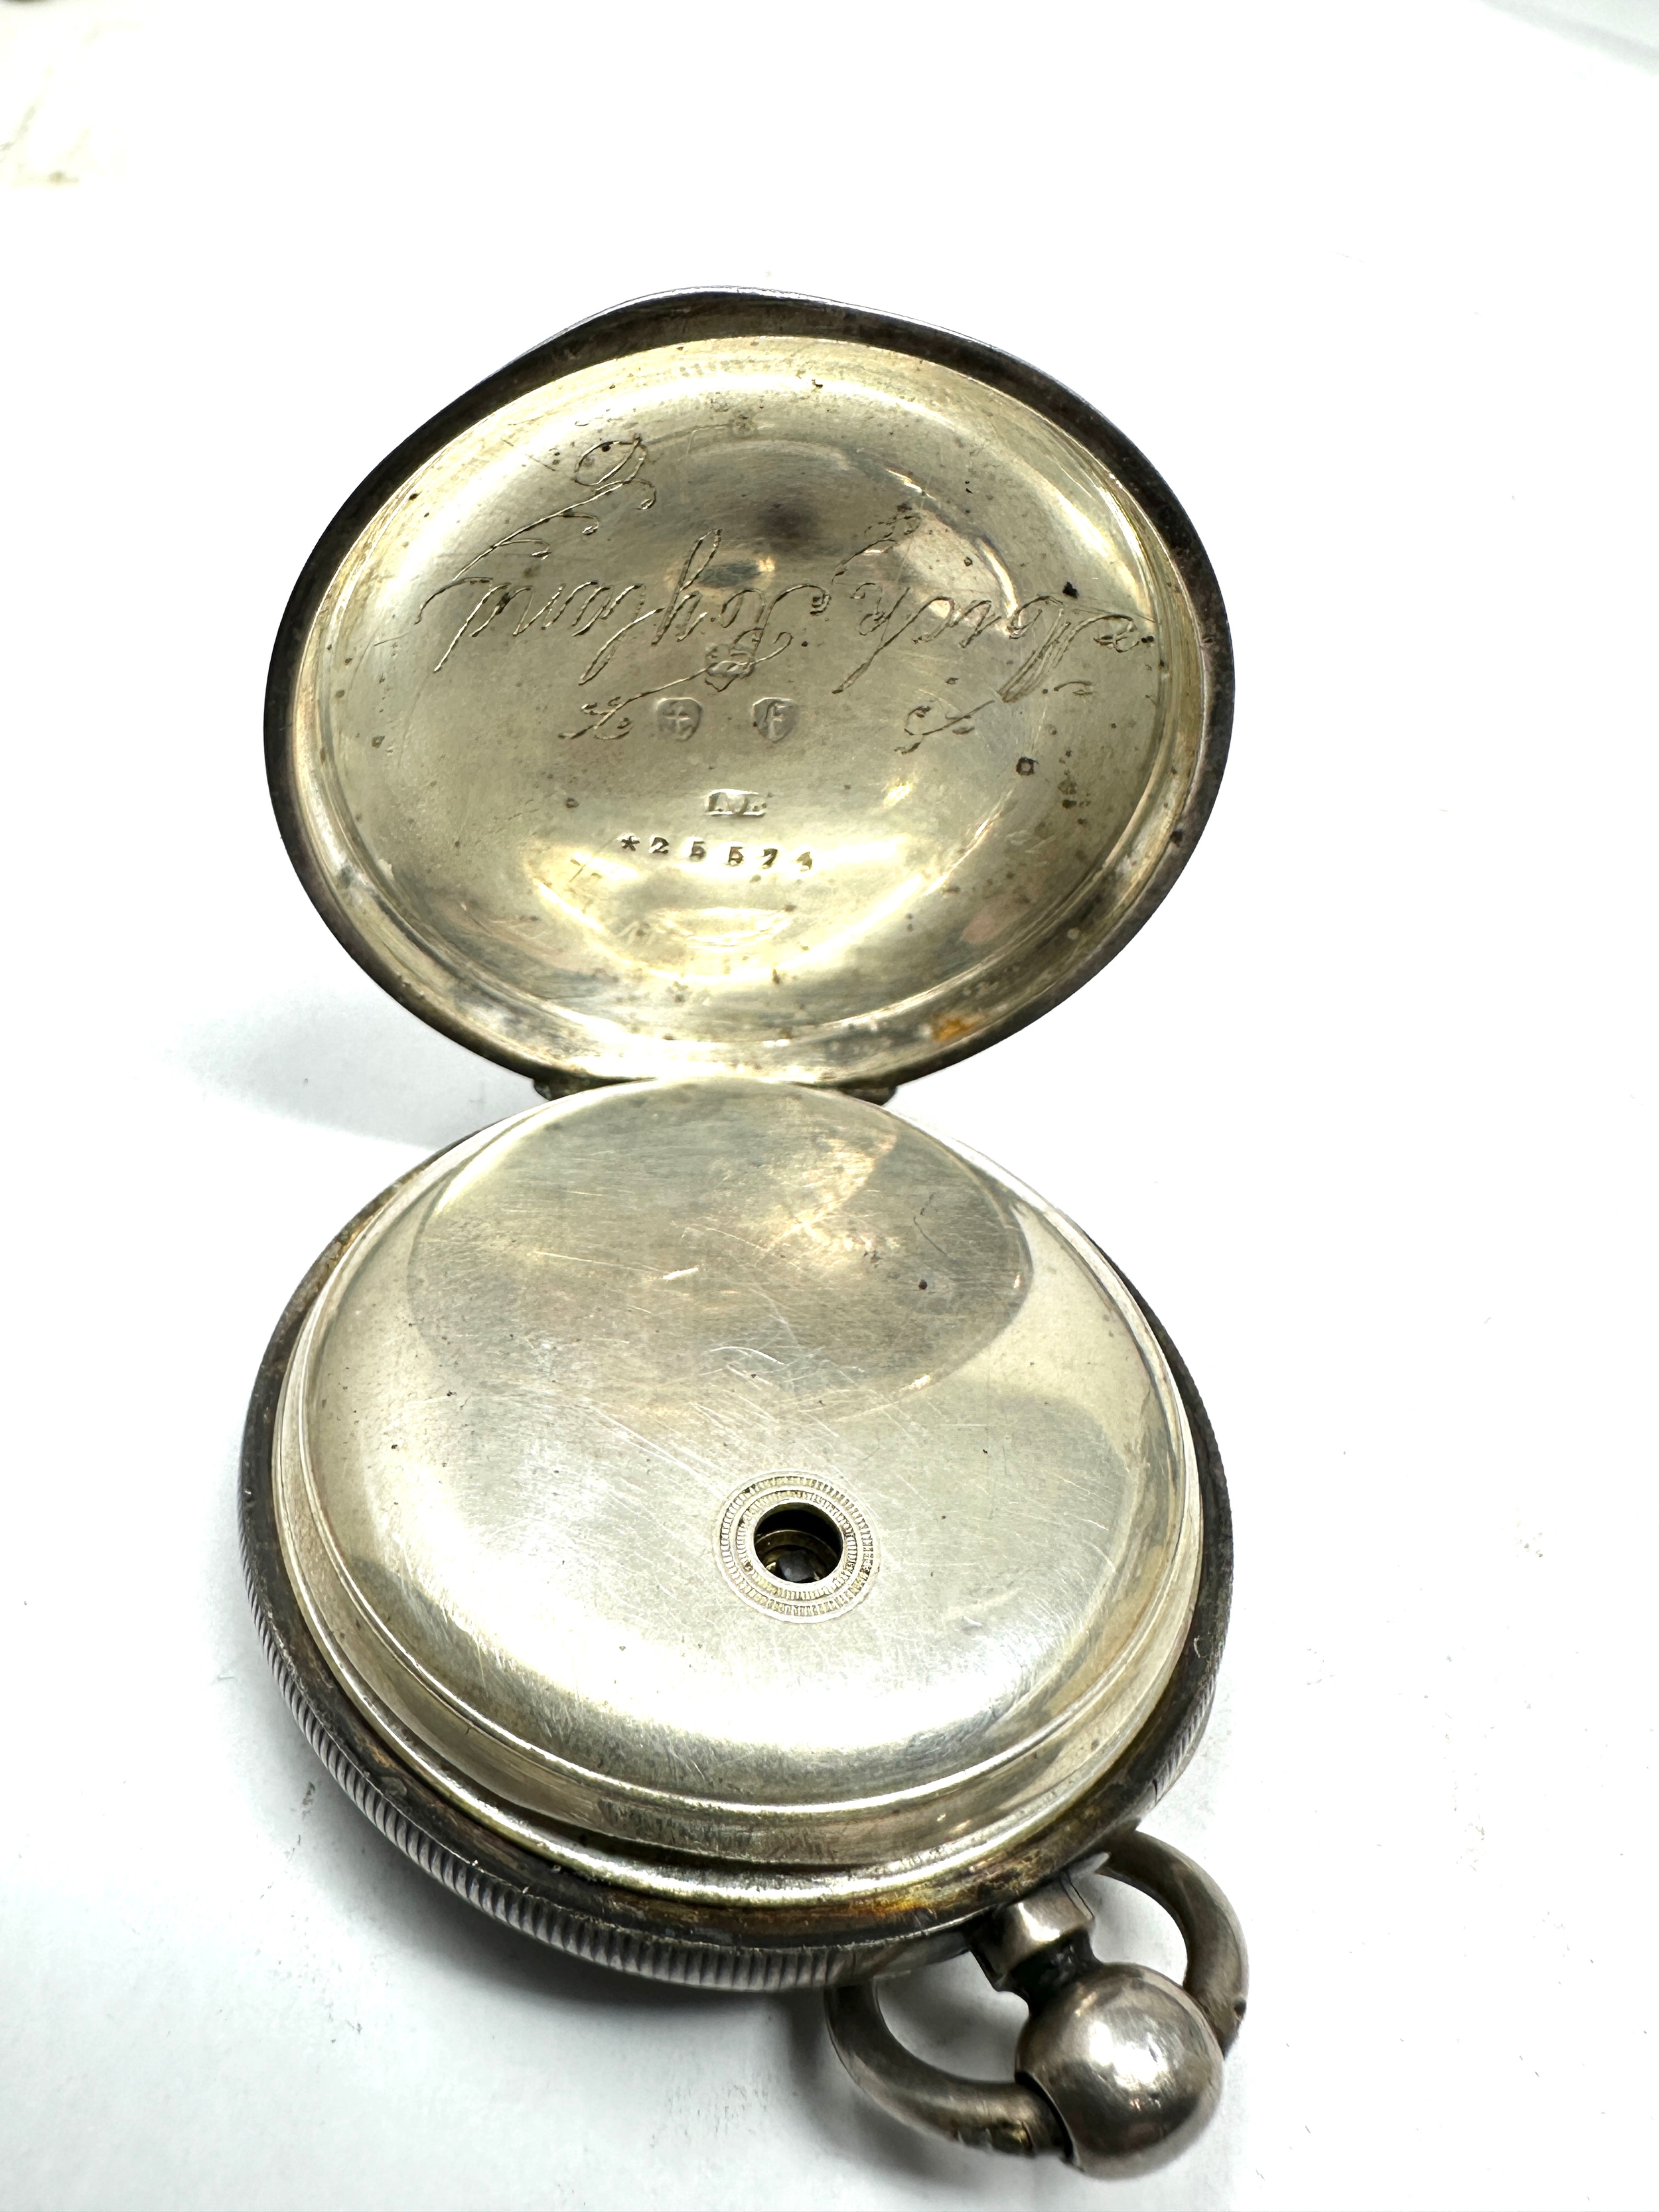 Antique silver open face pocket watch waltham mass movement the watch is ticking - Image 3 of 5